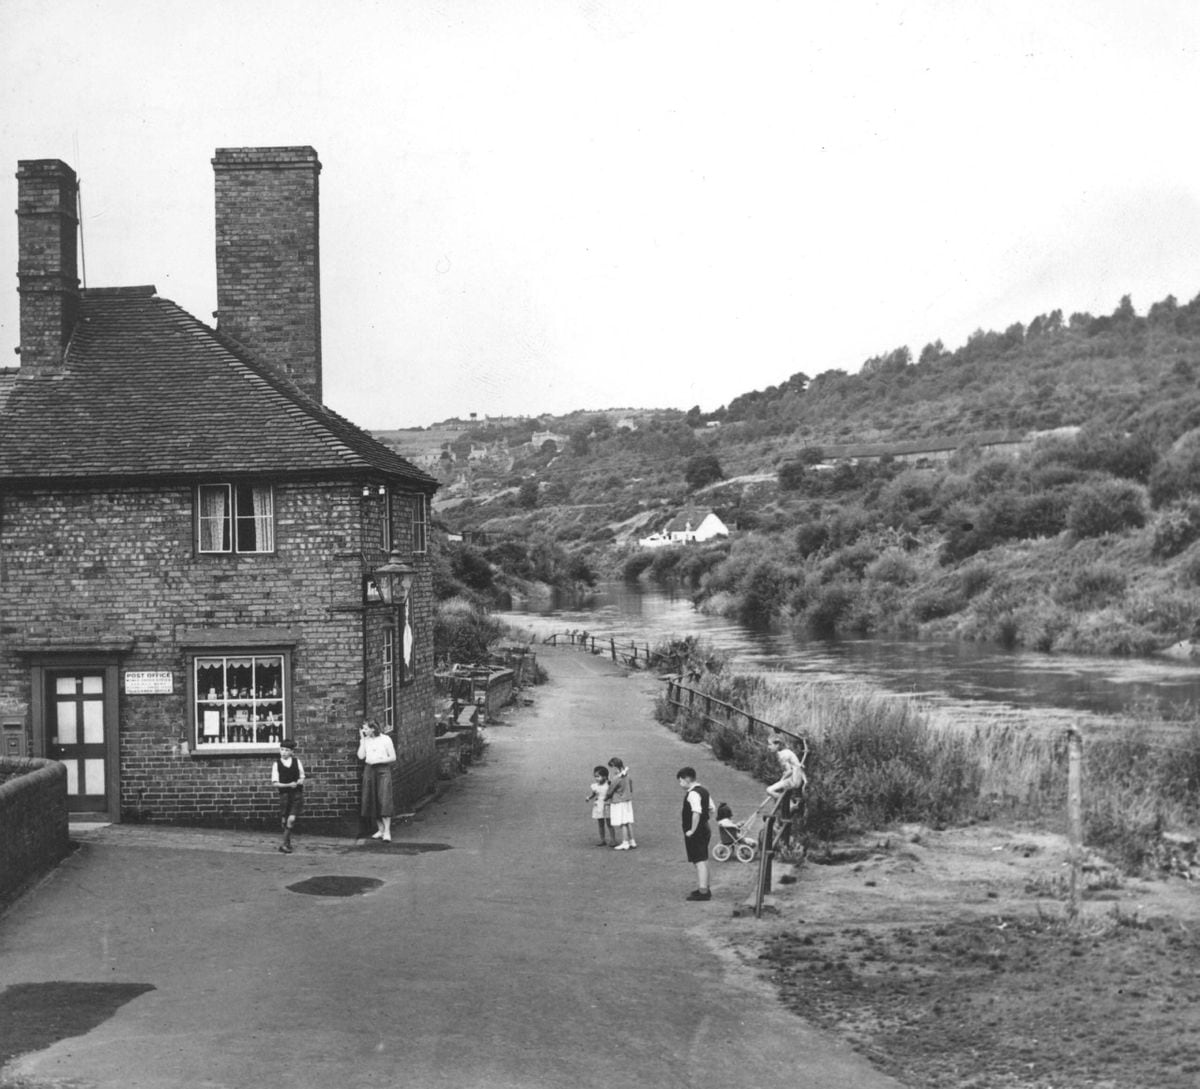 Jackfield on August 13, 1952, with the post office on the left which was about to be evacuated because of the land movement.